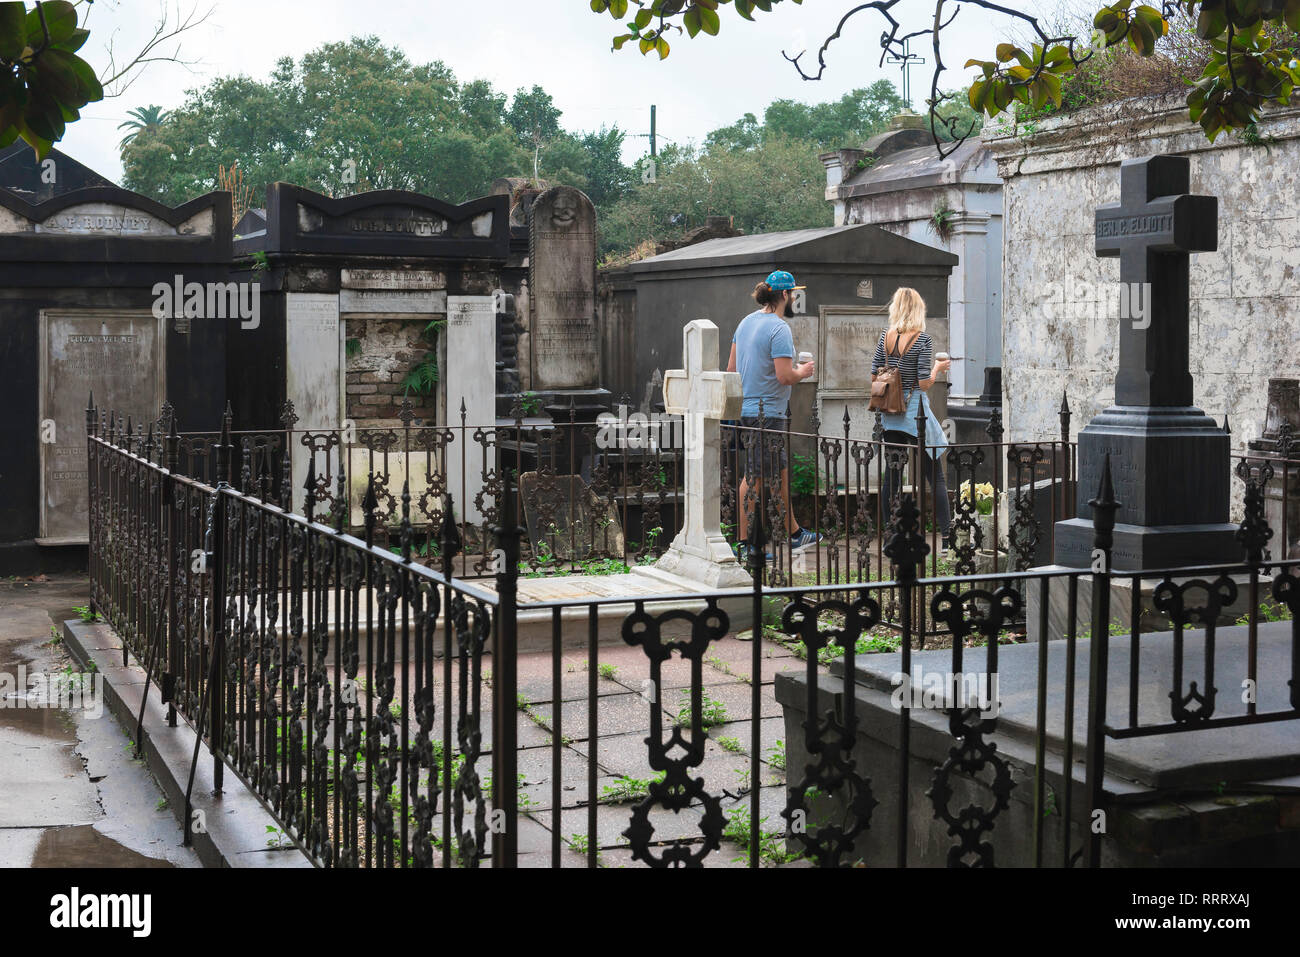 Lafayette Cemetery New Orleans, view of tourists visiting Lafayette Cemetery No.1 in the Garden District of New Orleans, Louisiana, USA Stock Photo